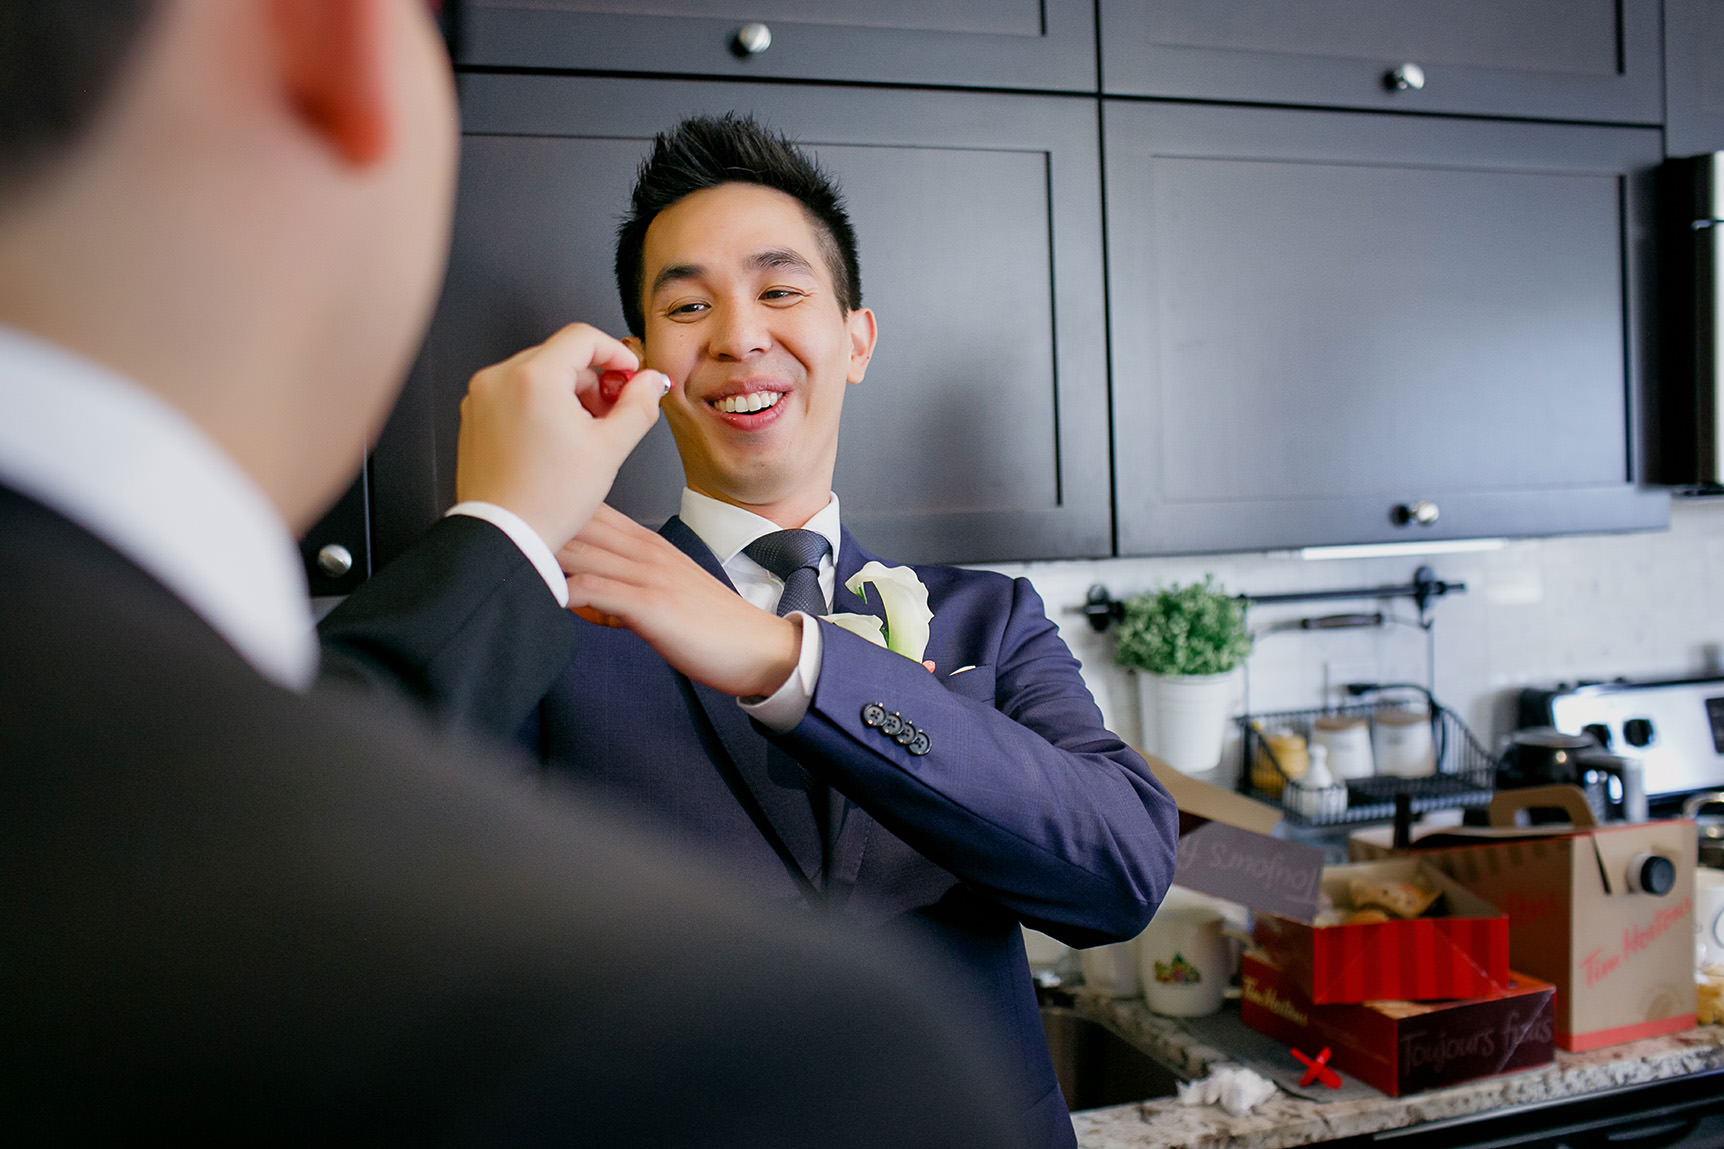 groomsman tries to put on lipstick at the groom